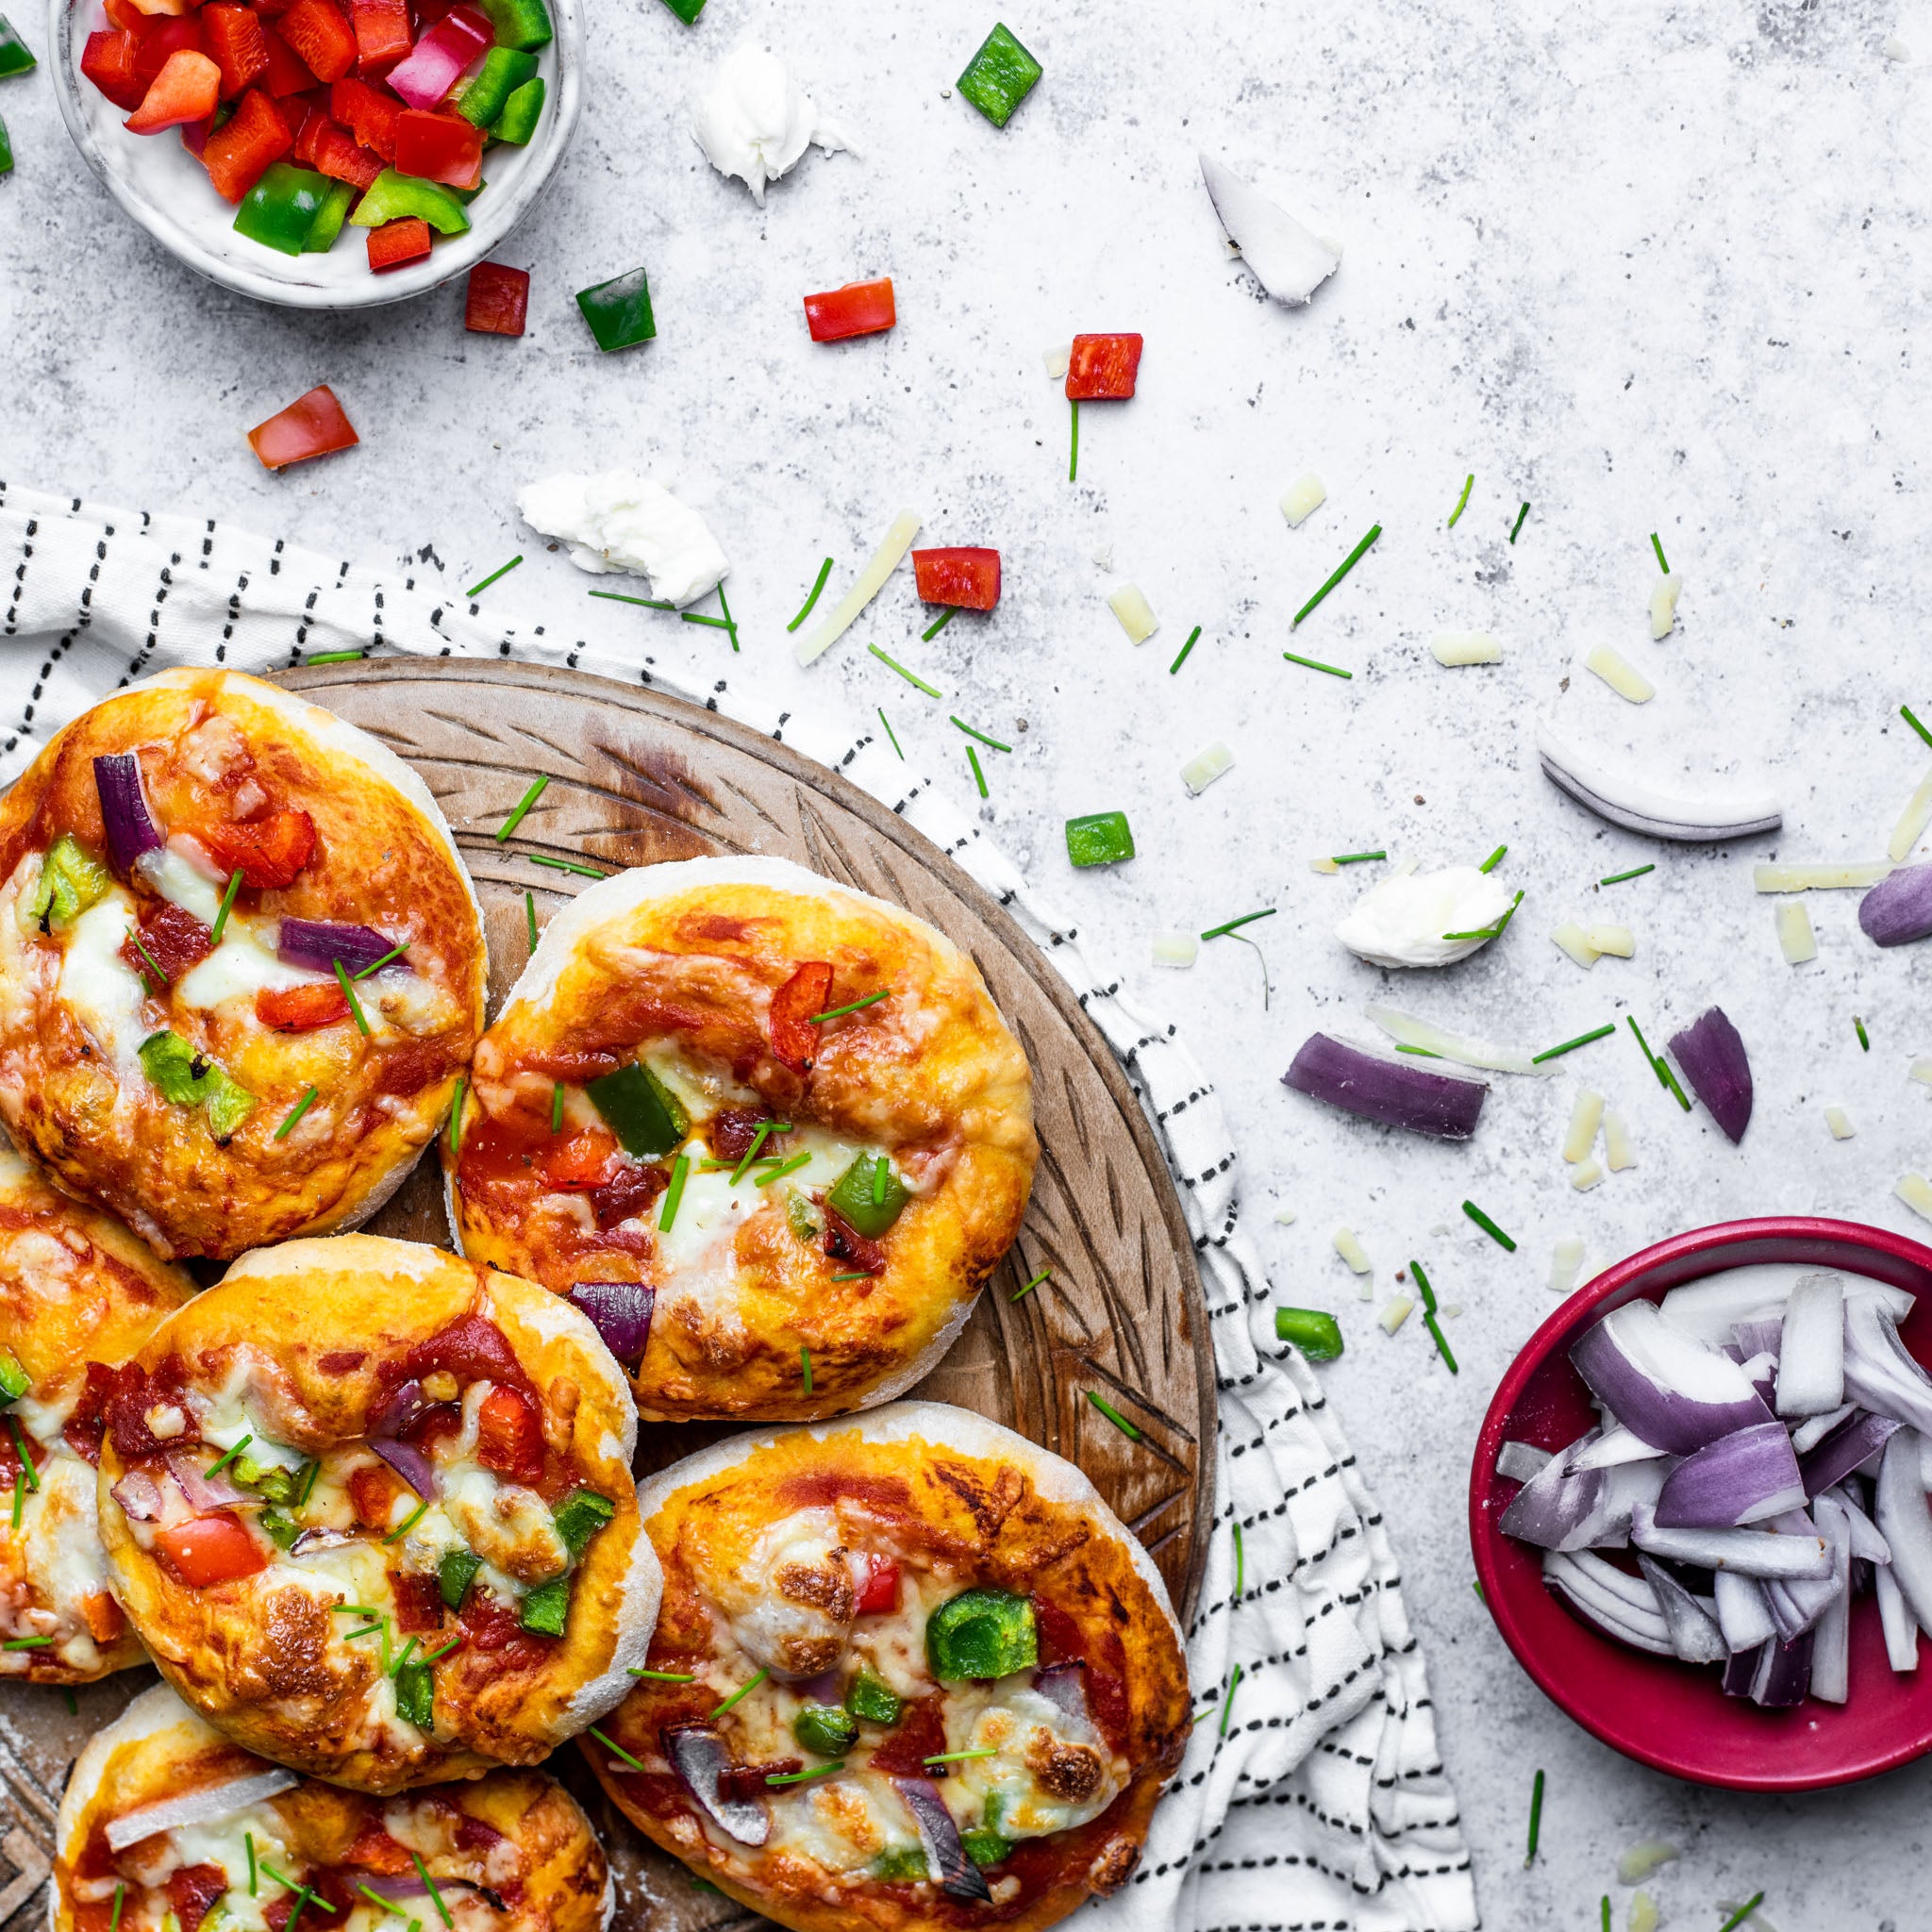 Make Your Own Mini Pizzas + Homemade Pizza Dough – The Comfort of Cooking